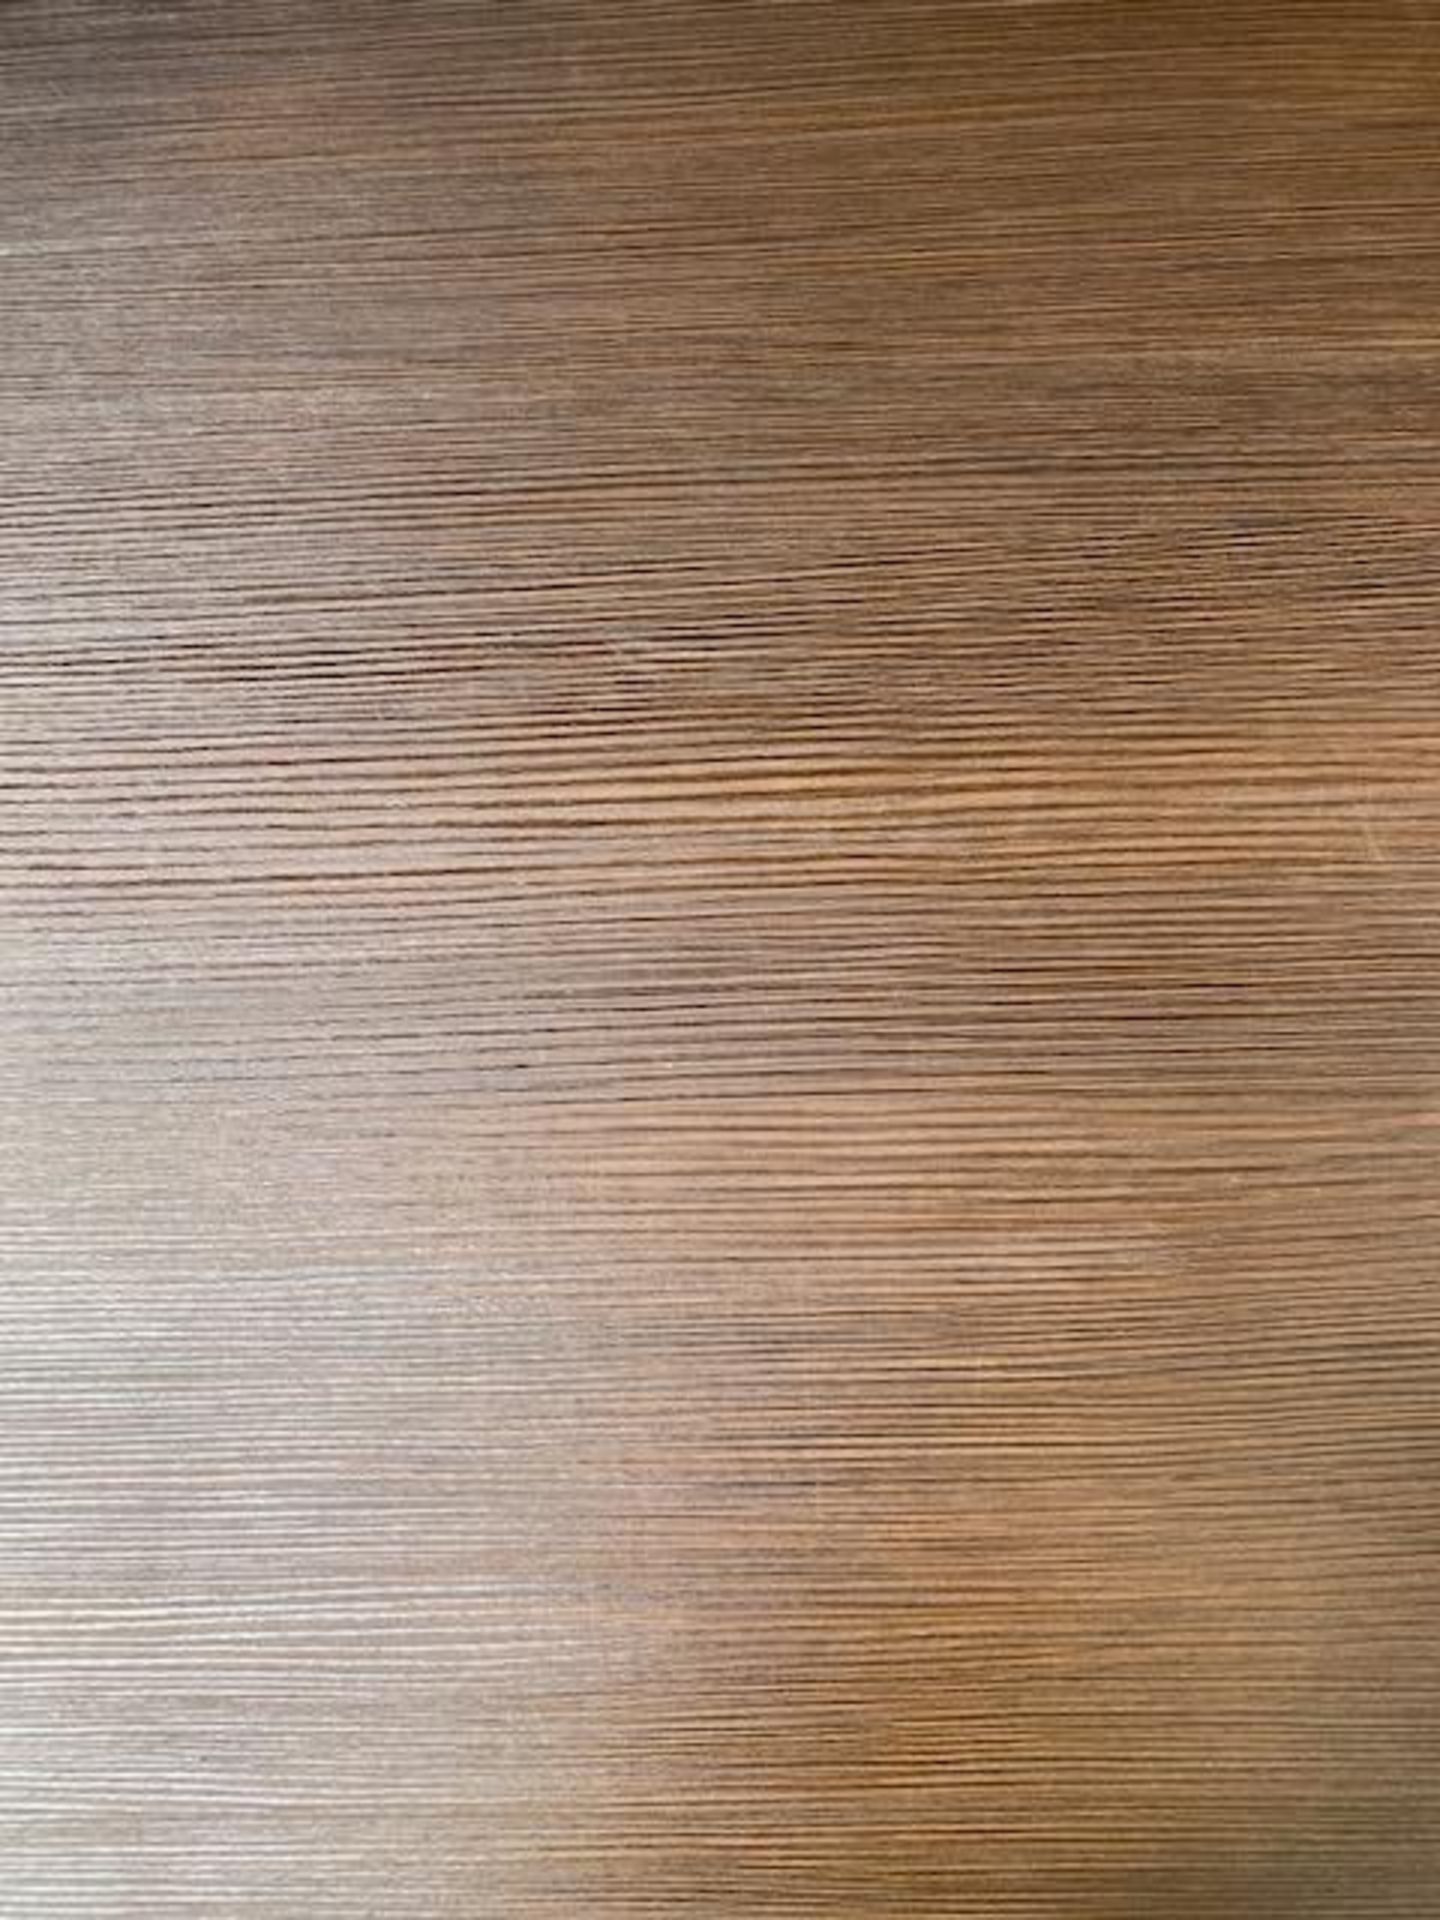 Pallet of Dark wood effect RMD wall panelling, corrugated board, 8ft x 4ft, Approx. 100 boards per